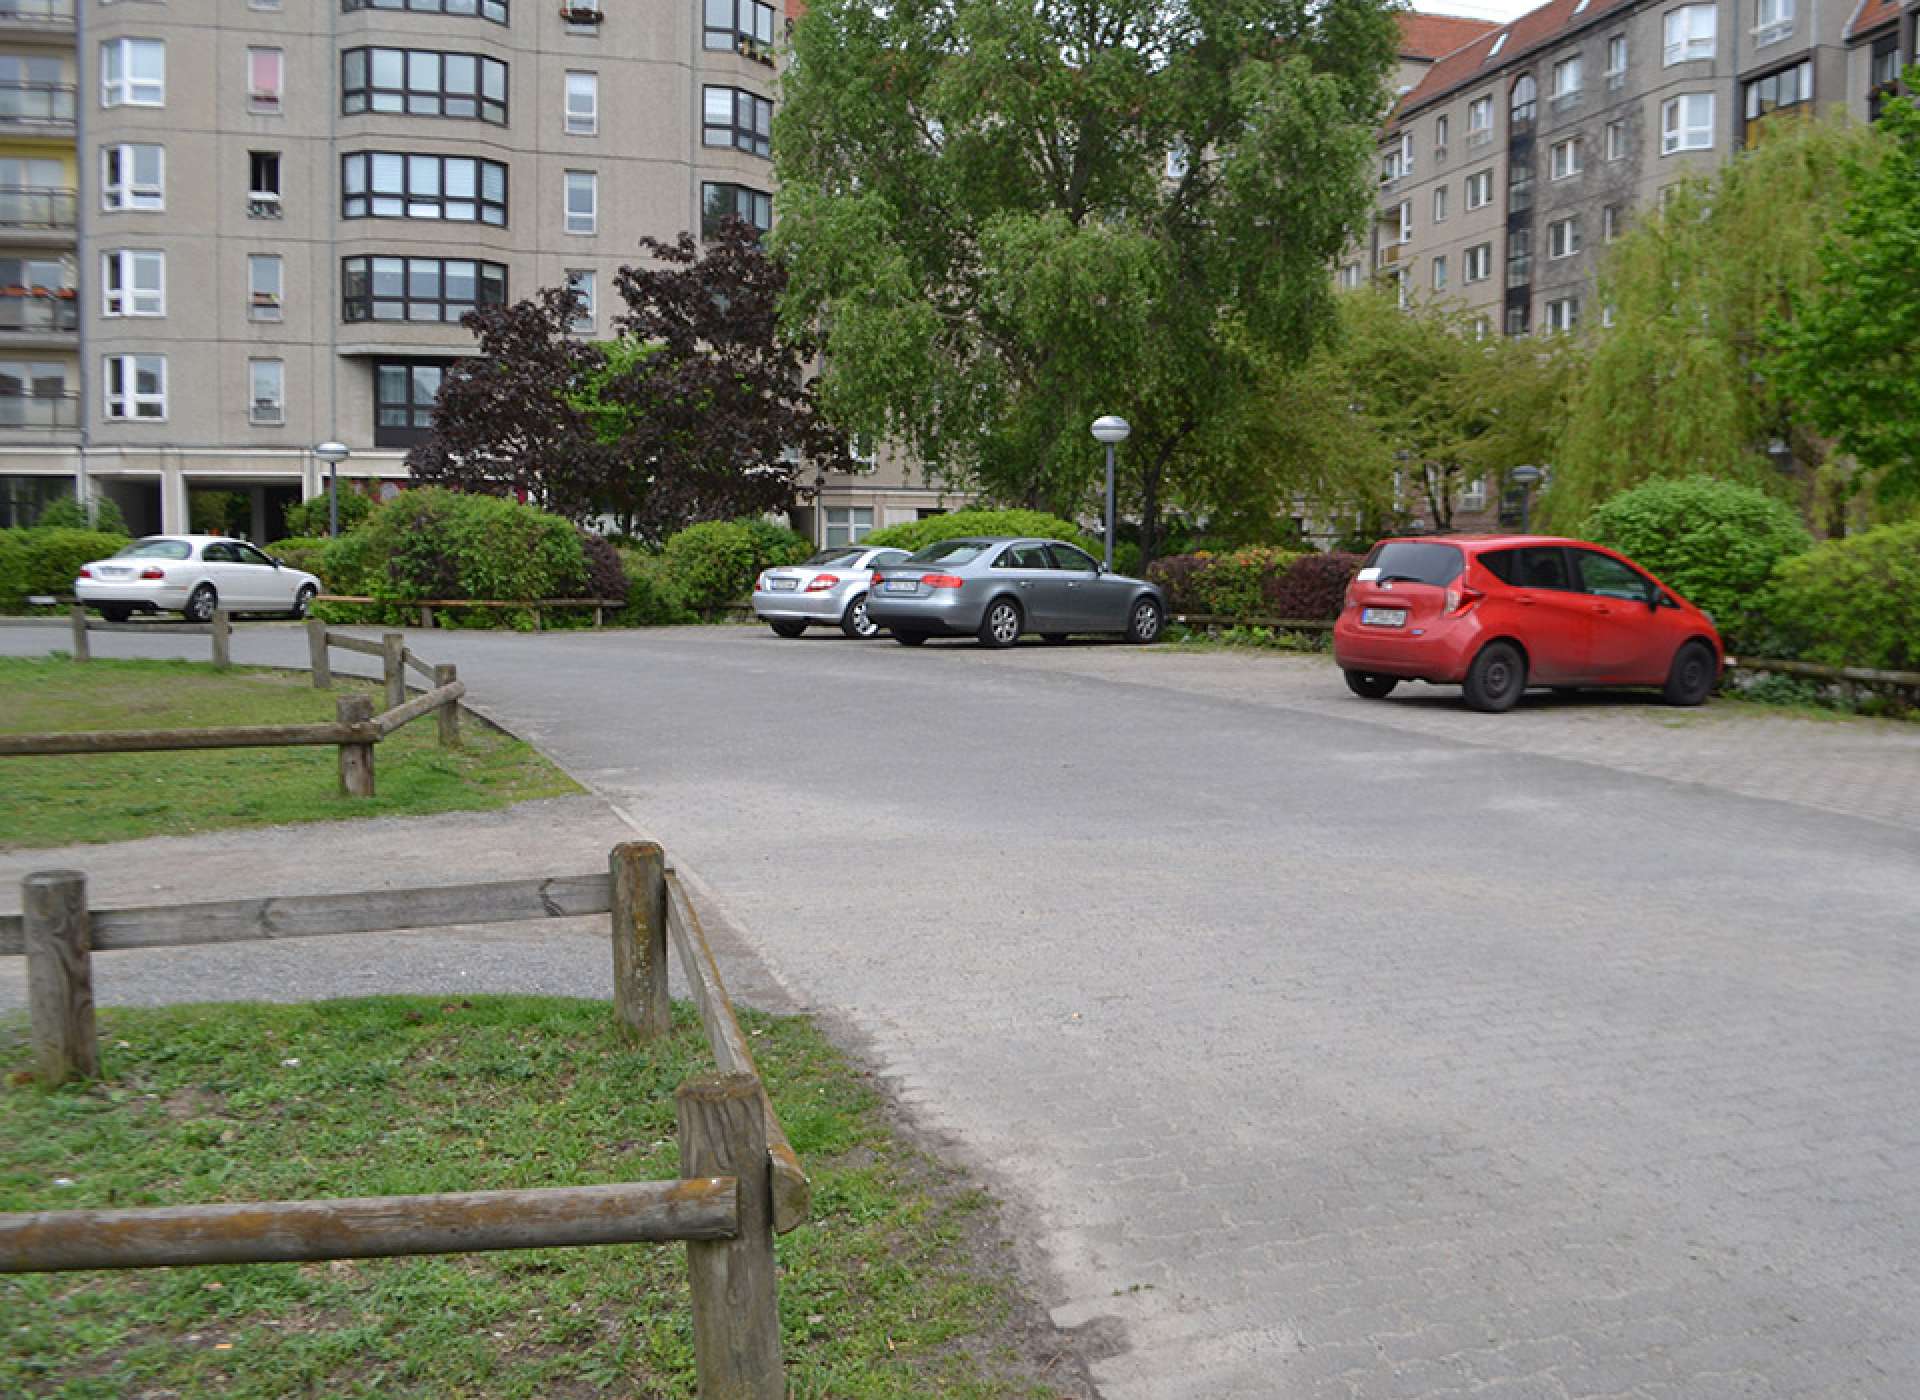 Adolf Hitler&#039;s Fuhrer bunker lies under this parking lot in Berlin today Courtesy Keith Huxen, PhD